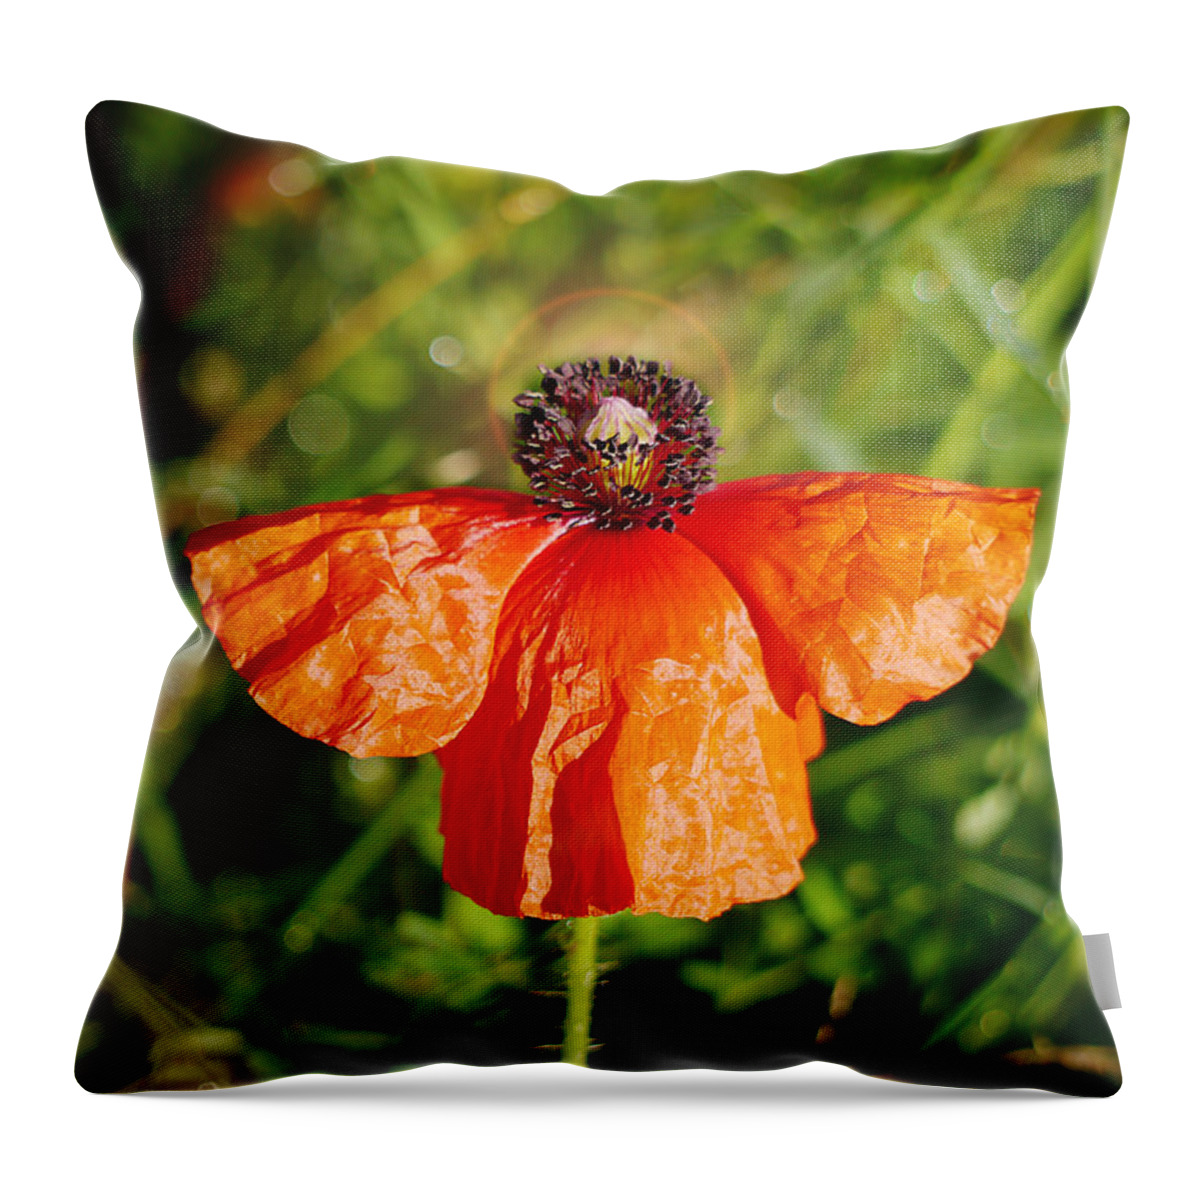 Richard Reeve Throw Pillow featuring the photograph Heavenly Poppy by Richard Reeve